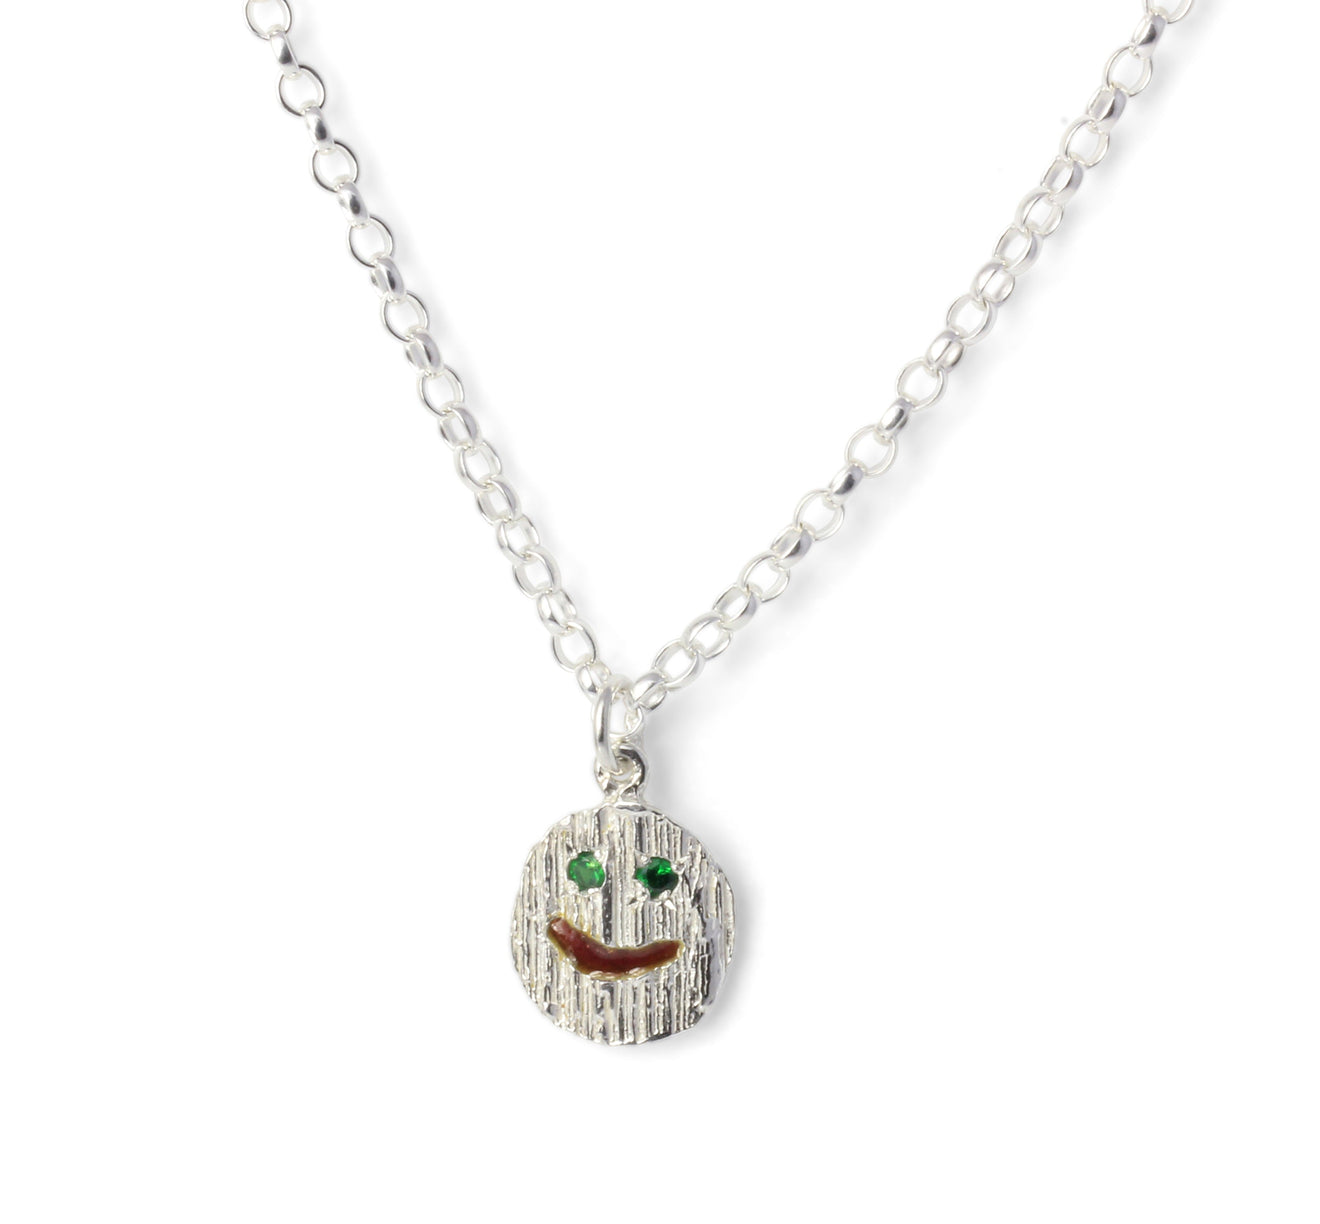 Eily O'Connell Smiley face green eyes Necklace